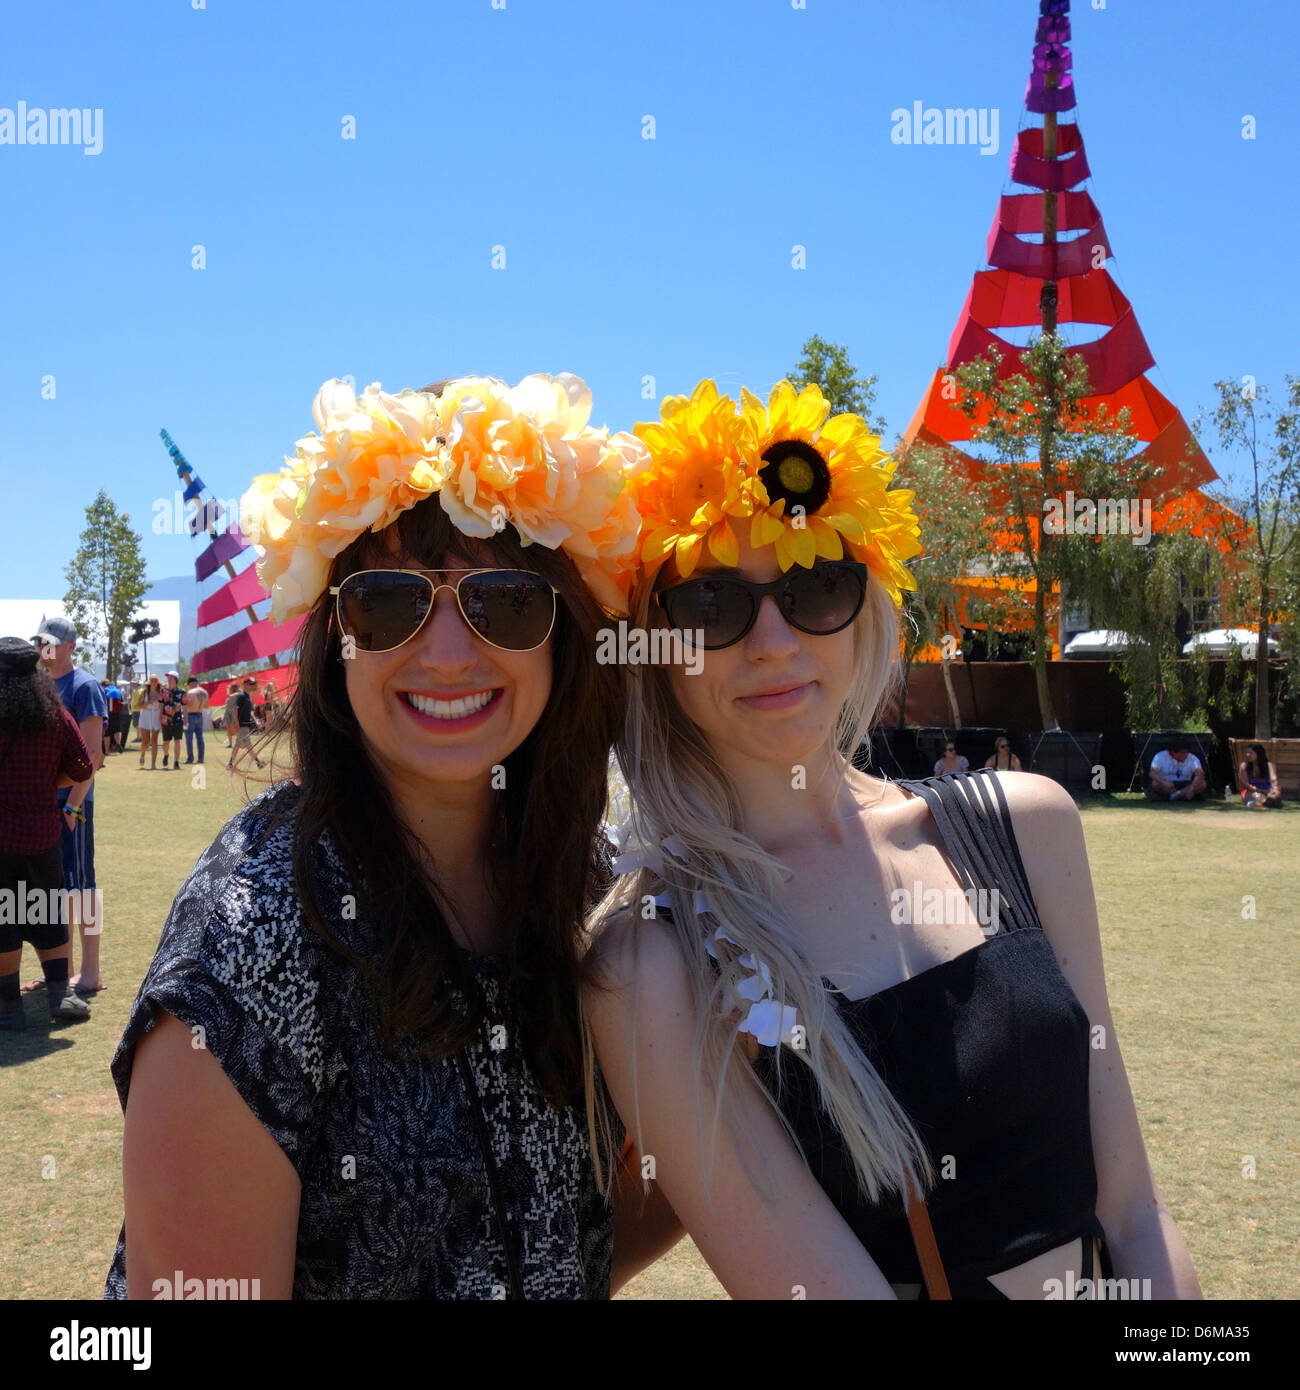 Indio, California. 19th April, 2013.  The Coachella Music Festival sold 80,000 tickets in a few hours. Fans from San Clemente, California. April 19, 2013. Photo credit: Lisa Werner/Alamy Live News Stock Photo